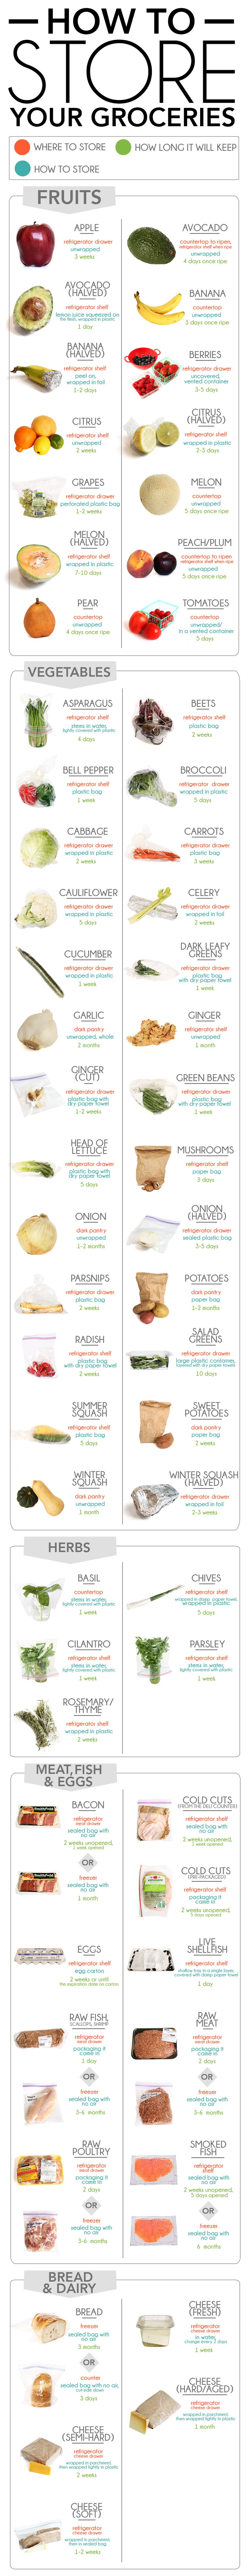 How to Store Your Groceries #infographic